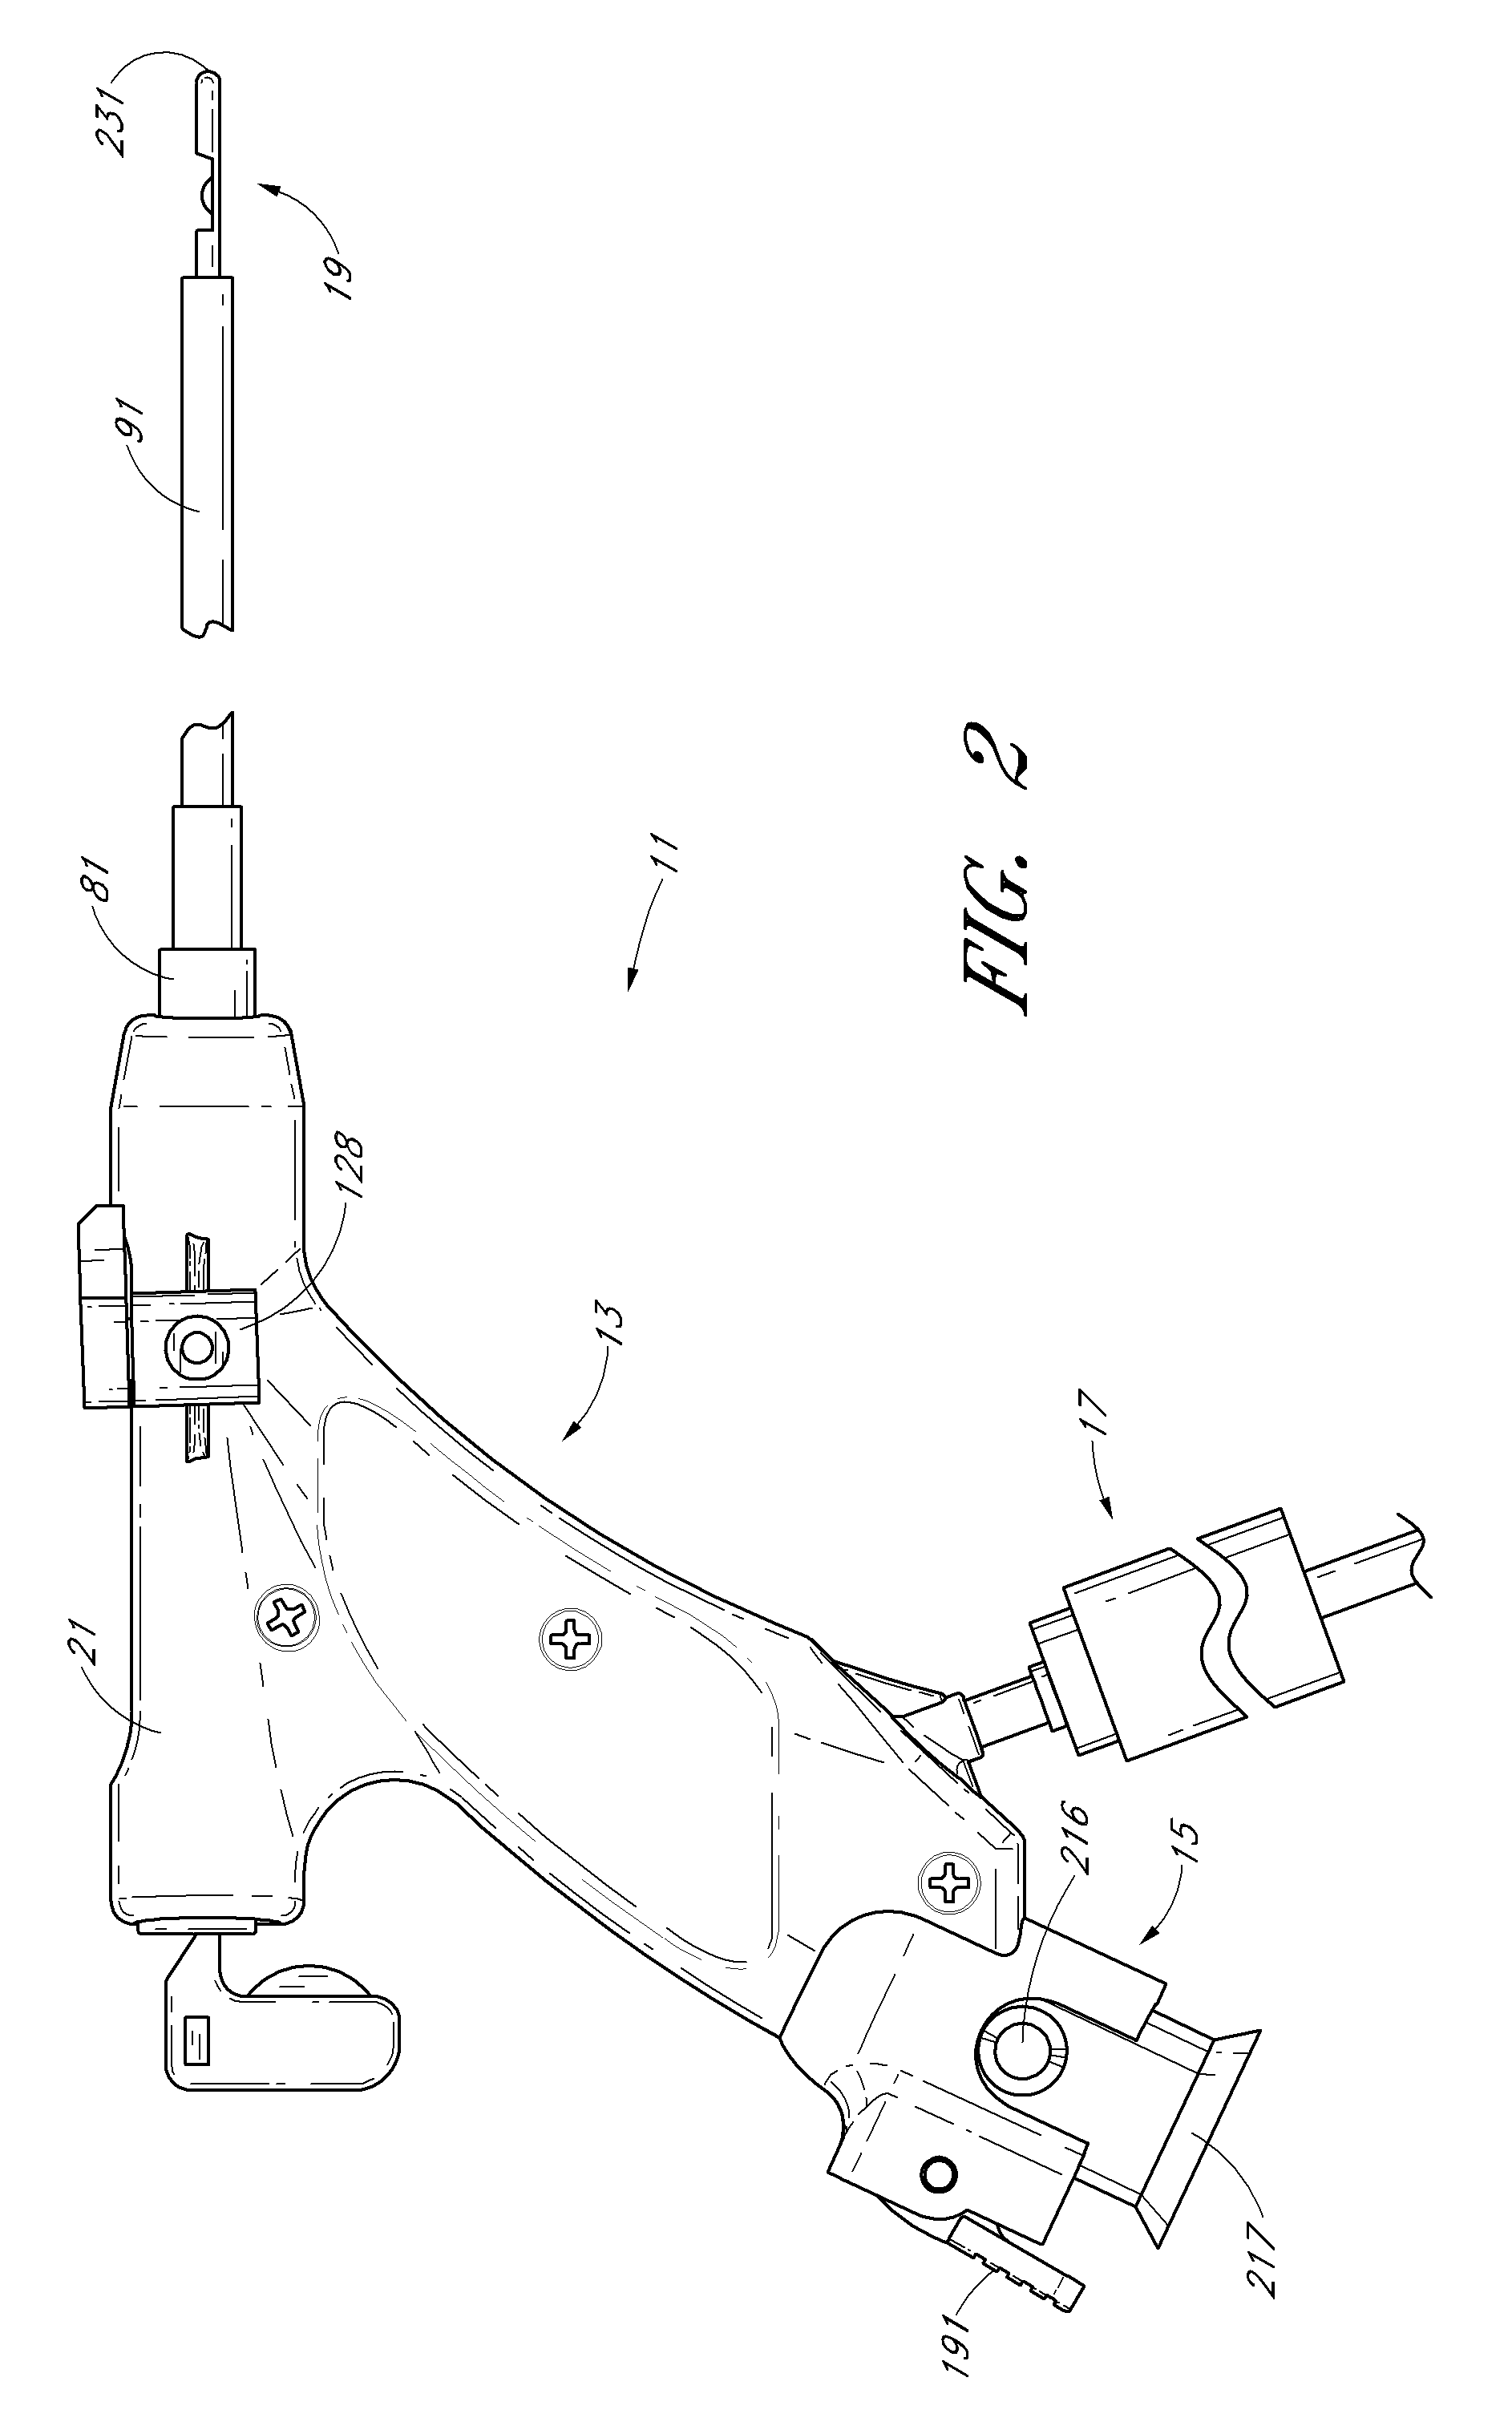 System for use in performing a medical procedure and introducer device suitable for use in said system